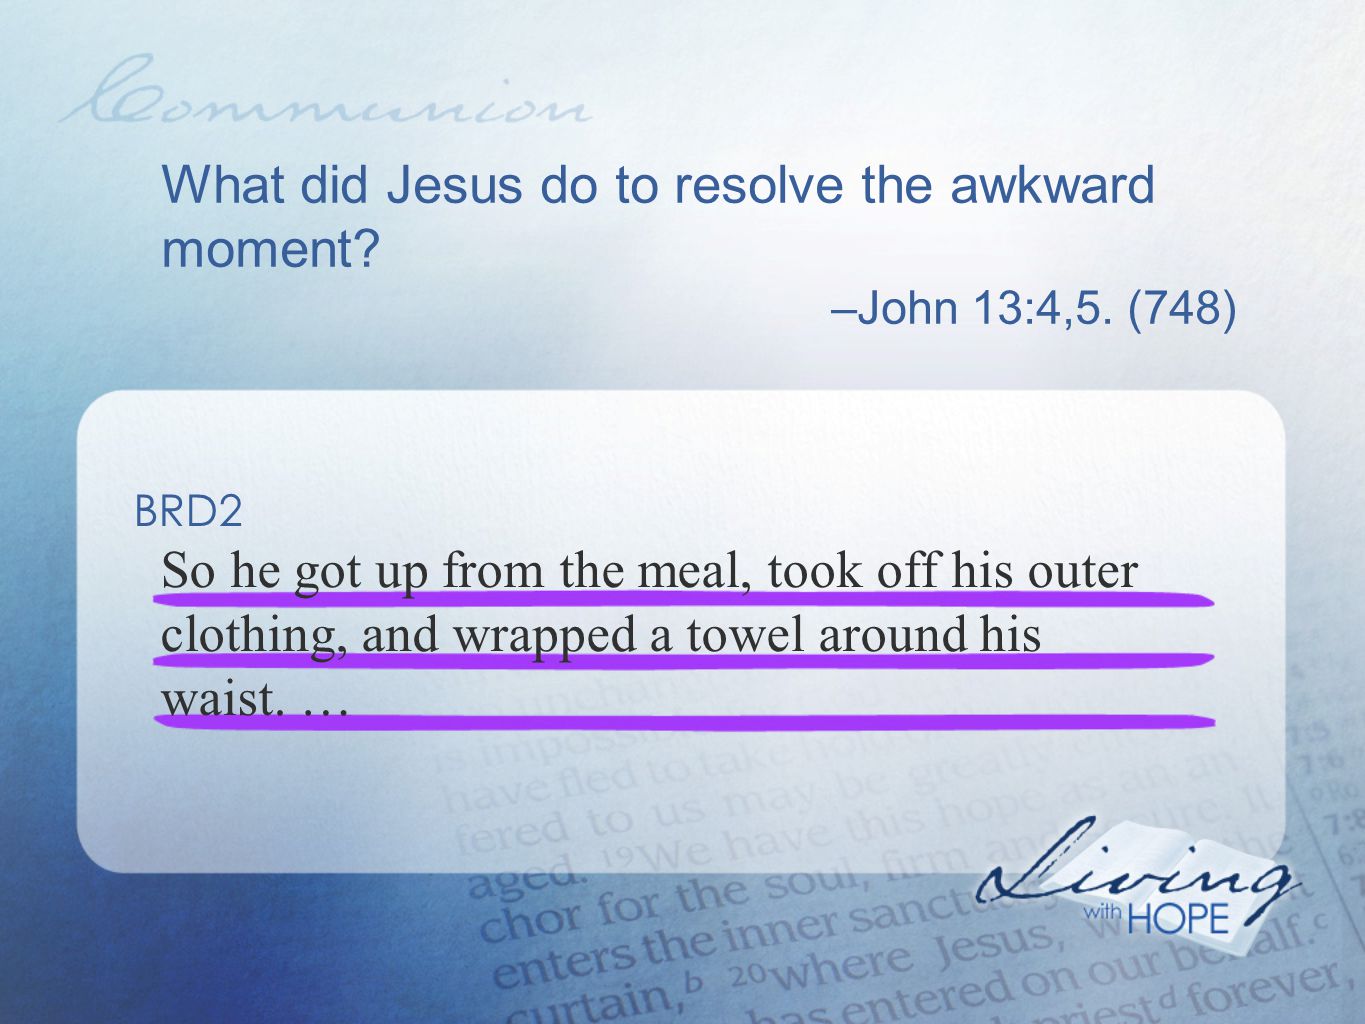 What did Jesus do to resolve the awkward moment